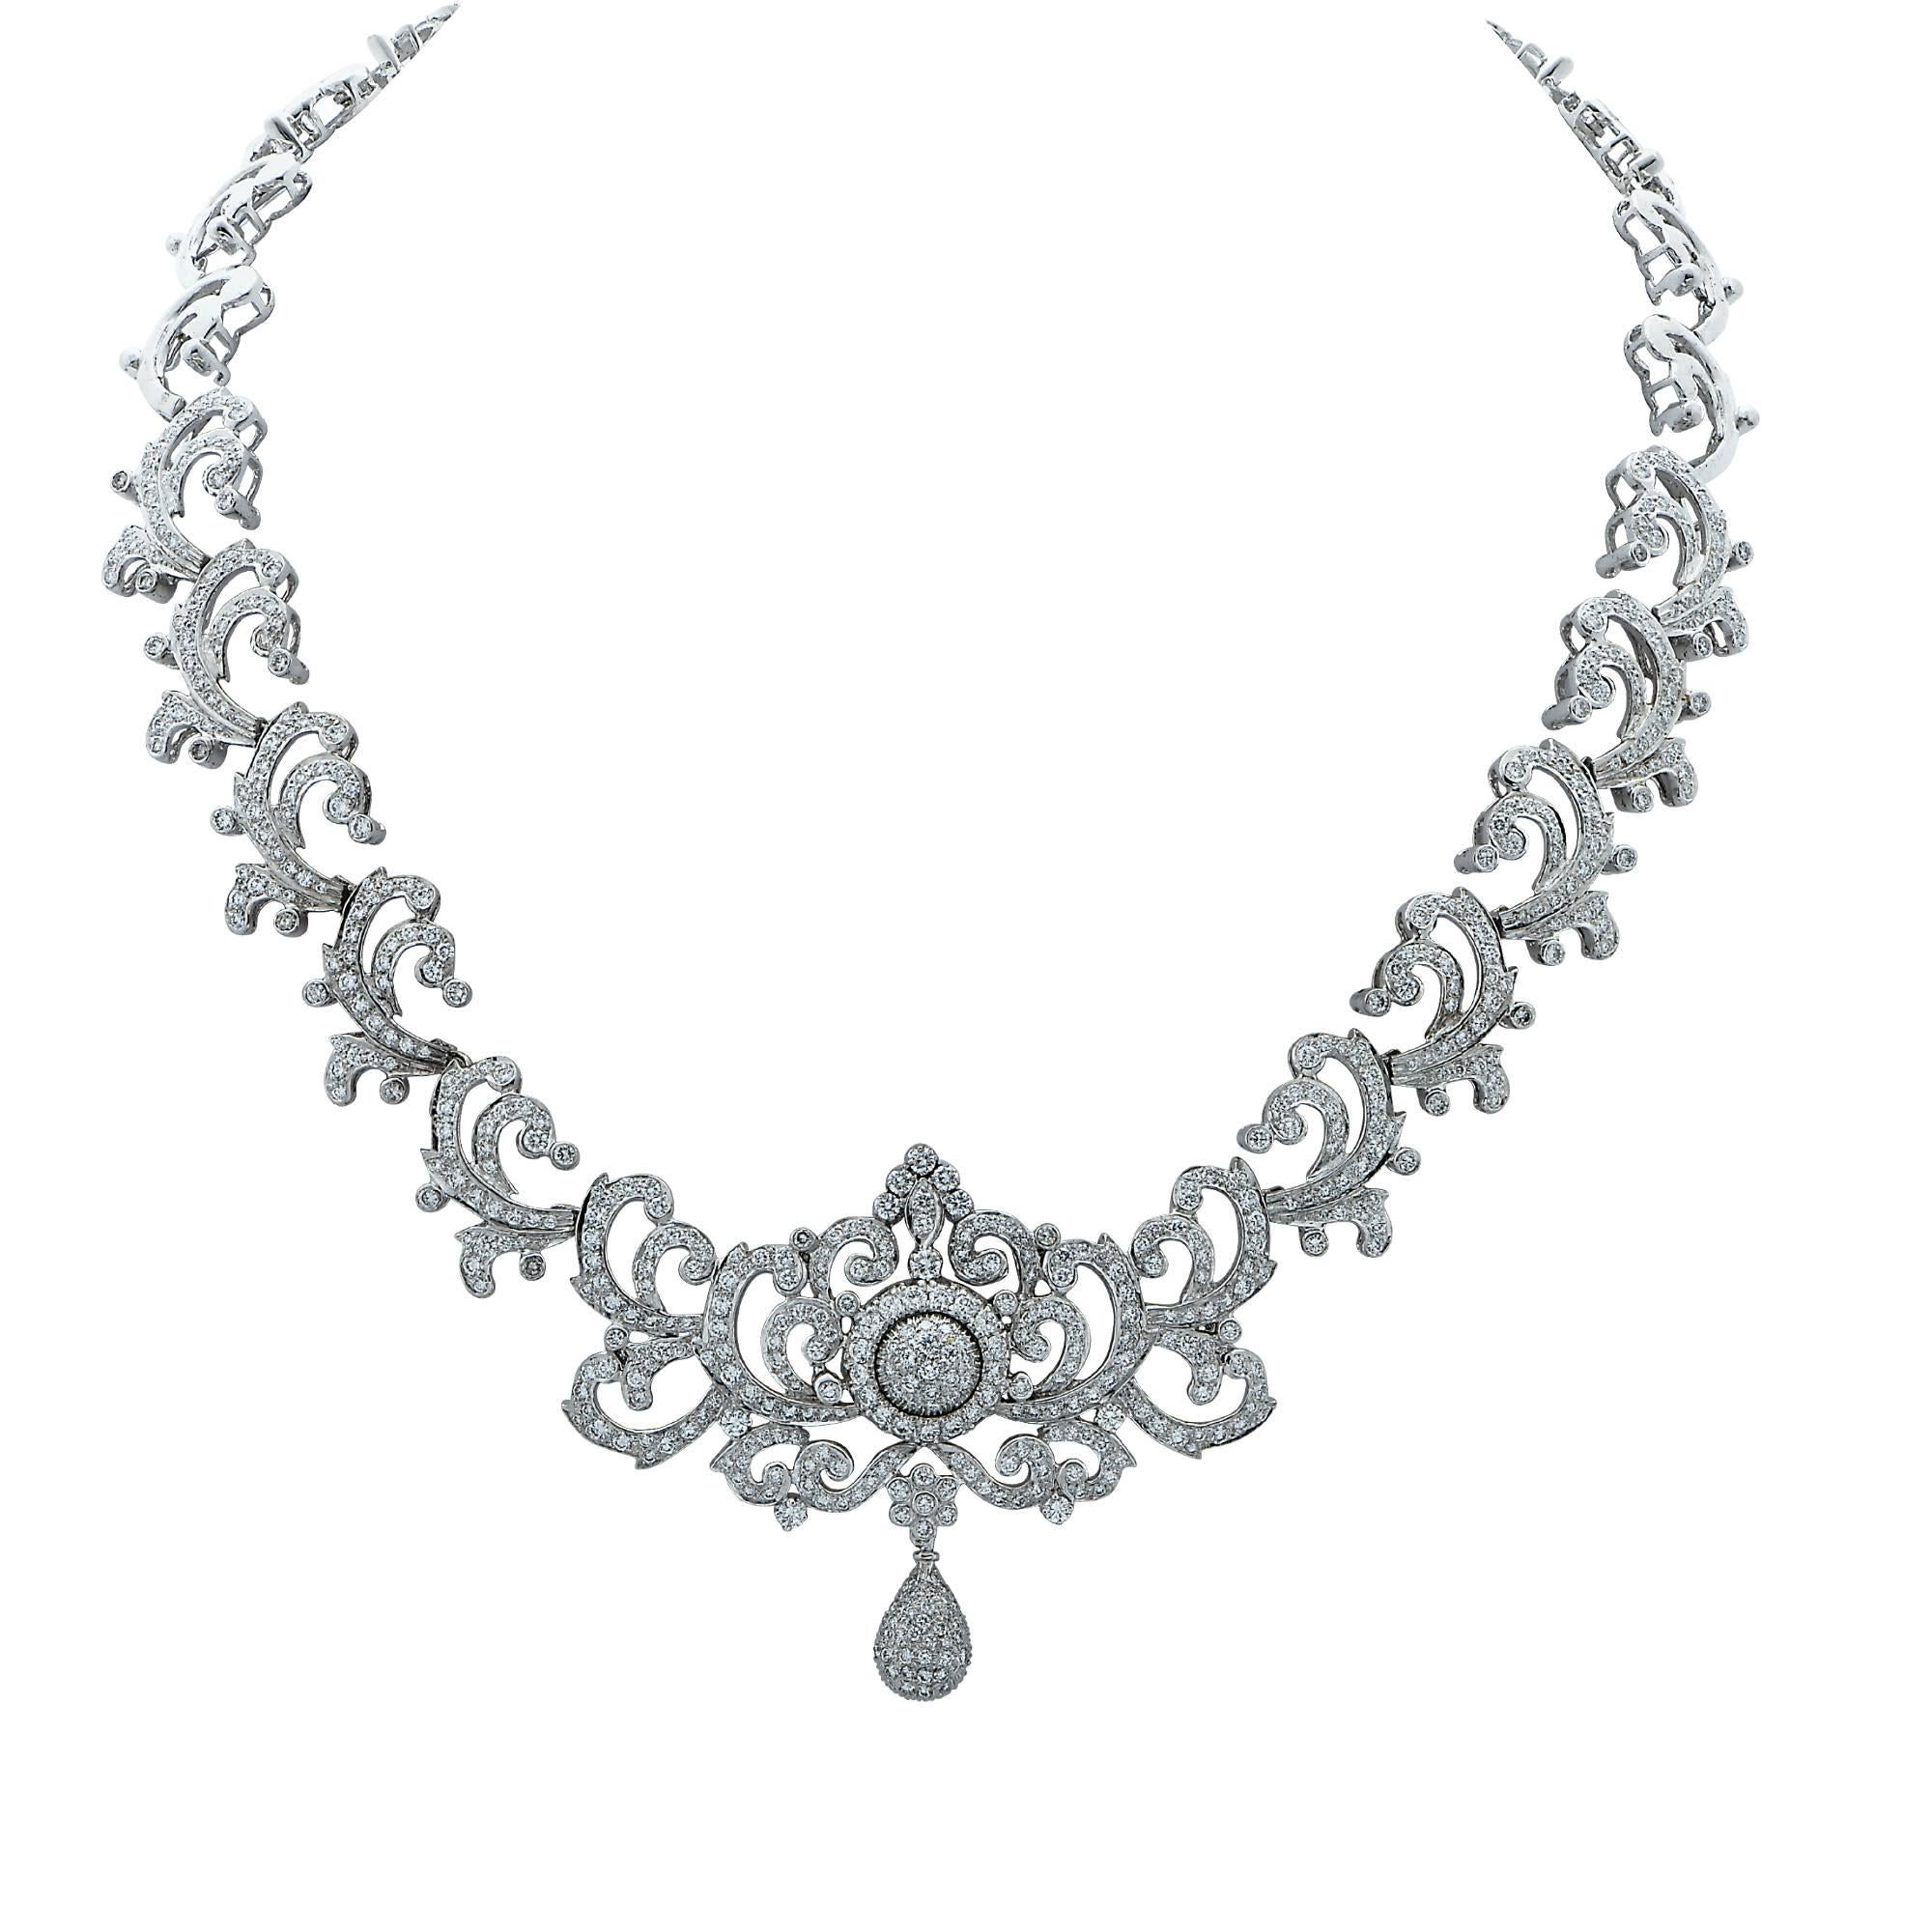 Ornate baroque inspired 18K White Gold necklace and earring set featuring 10.83cts of round brilliant cut diamonds G-H color and VS-SI clarity, expertly crafted in a diamond adorned thorn and leaf motif, culminating in a dangling diamond encrusted